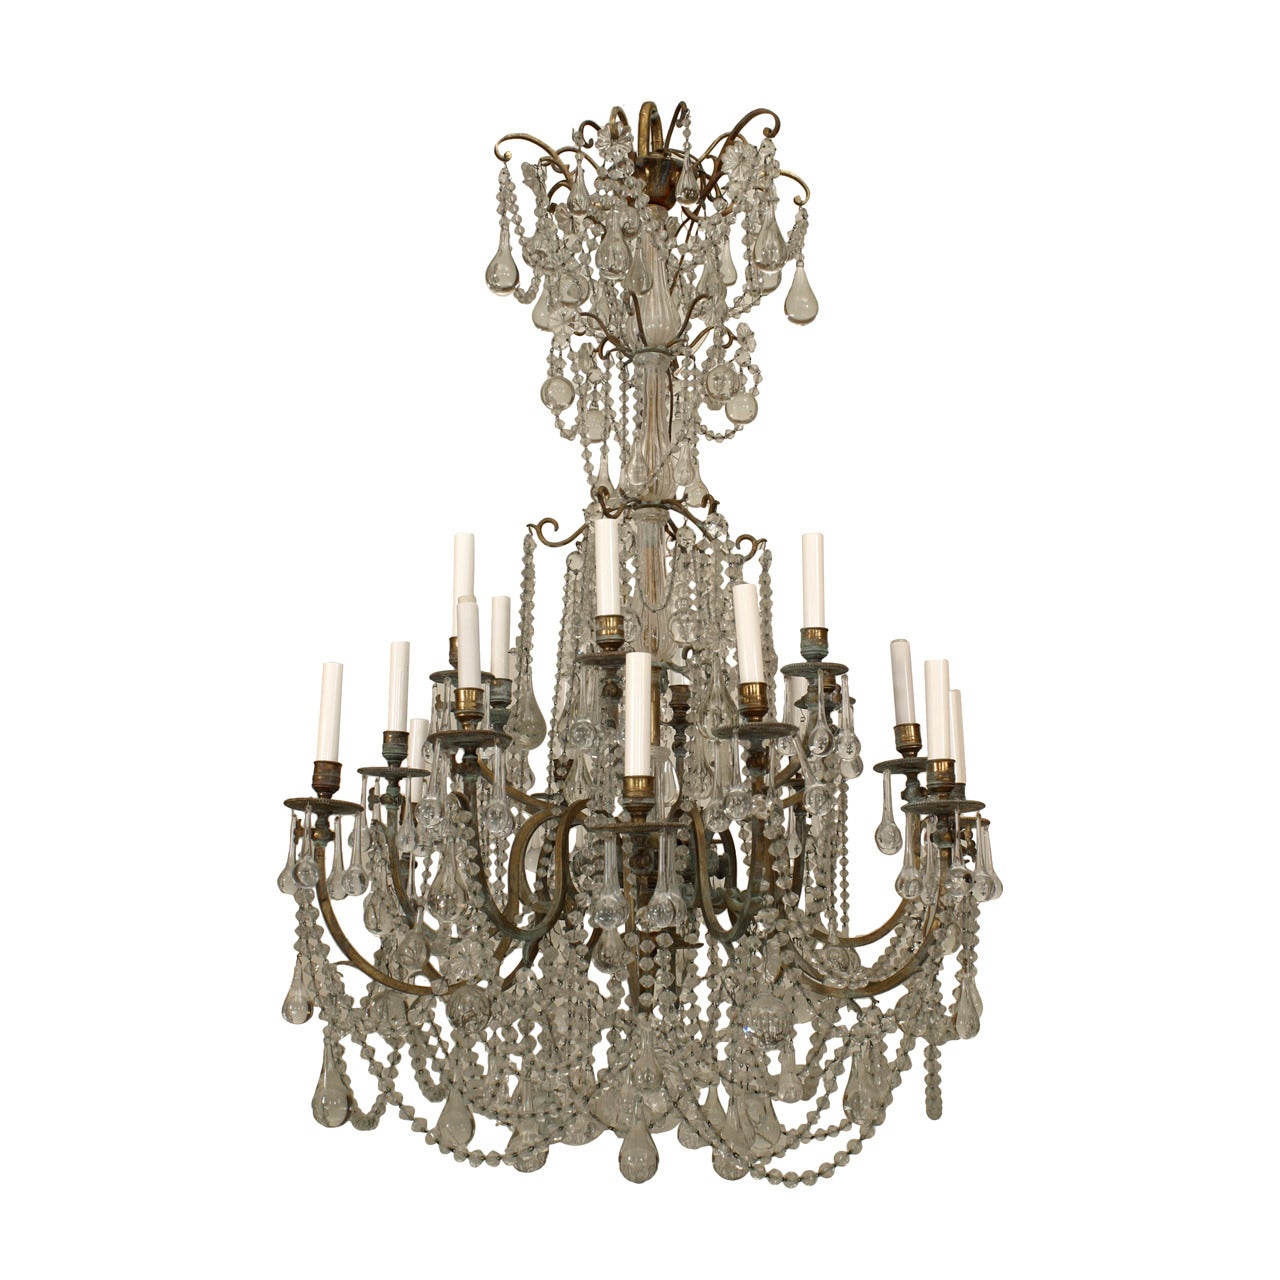 Turn-of-the-Century Eighteen-Arm Crystal and Bronze Chandelier